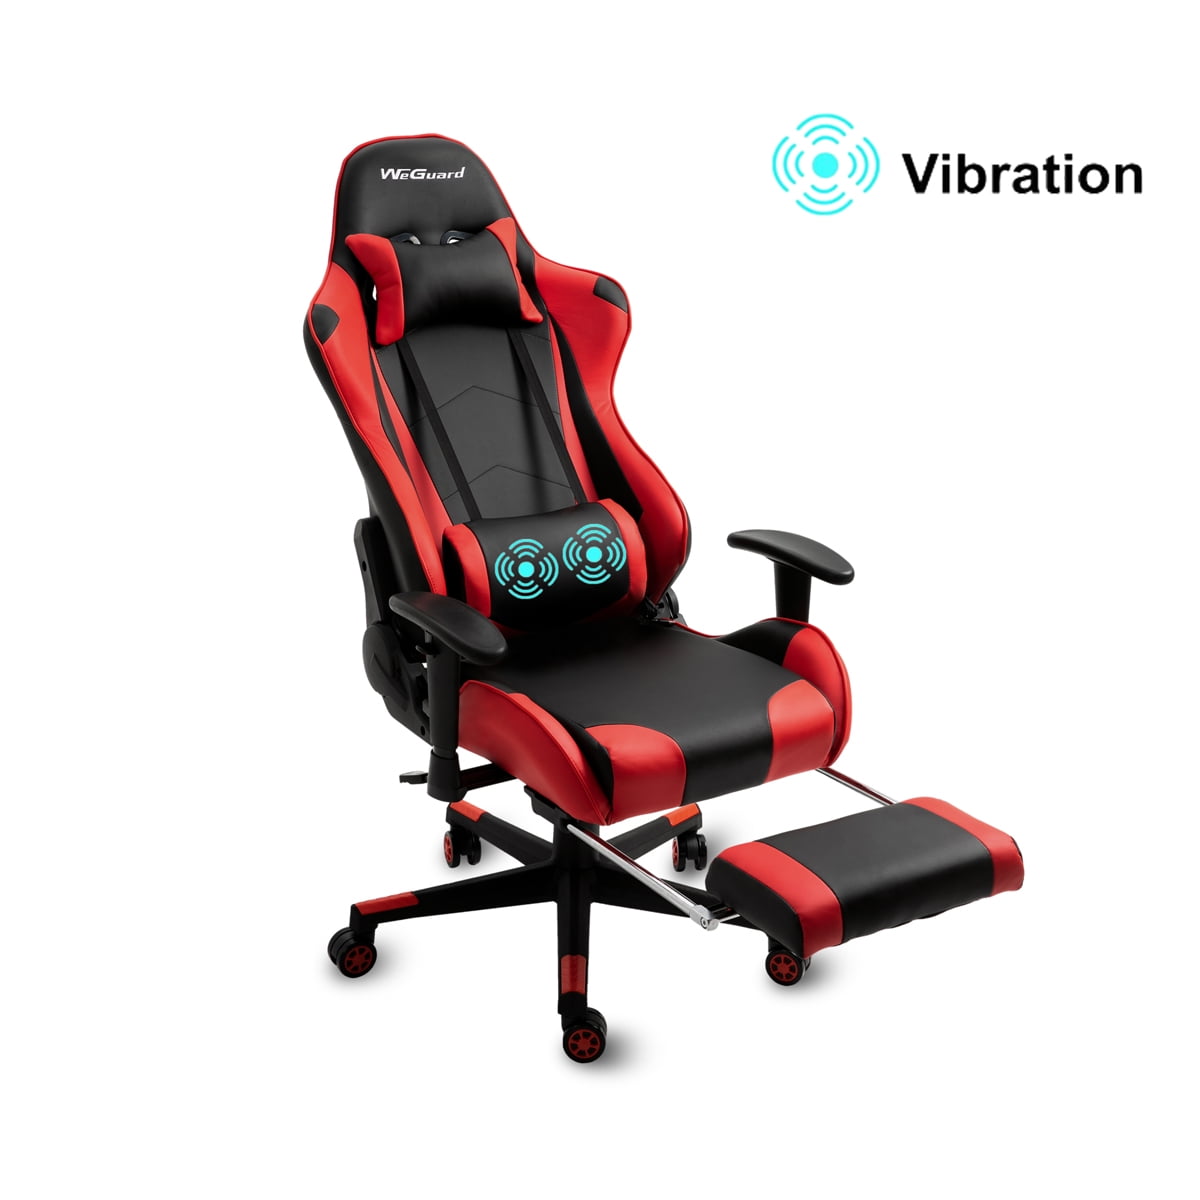 Headrest Lumbar Support 4HOMART Gaming Chair,High Back Ergonomic Style Racing Chair Leather 135 Degree Reclining Computer Chair 360 Degree Swivel Adjustable Office Chair Footrest Black Grey 